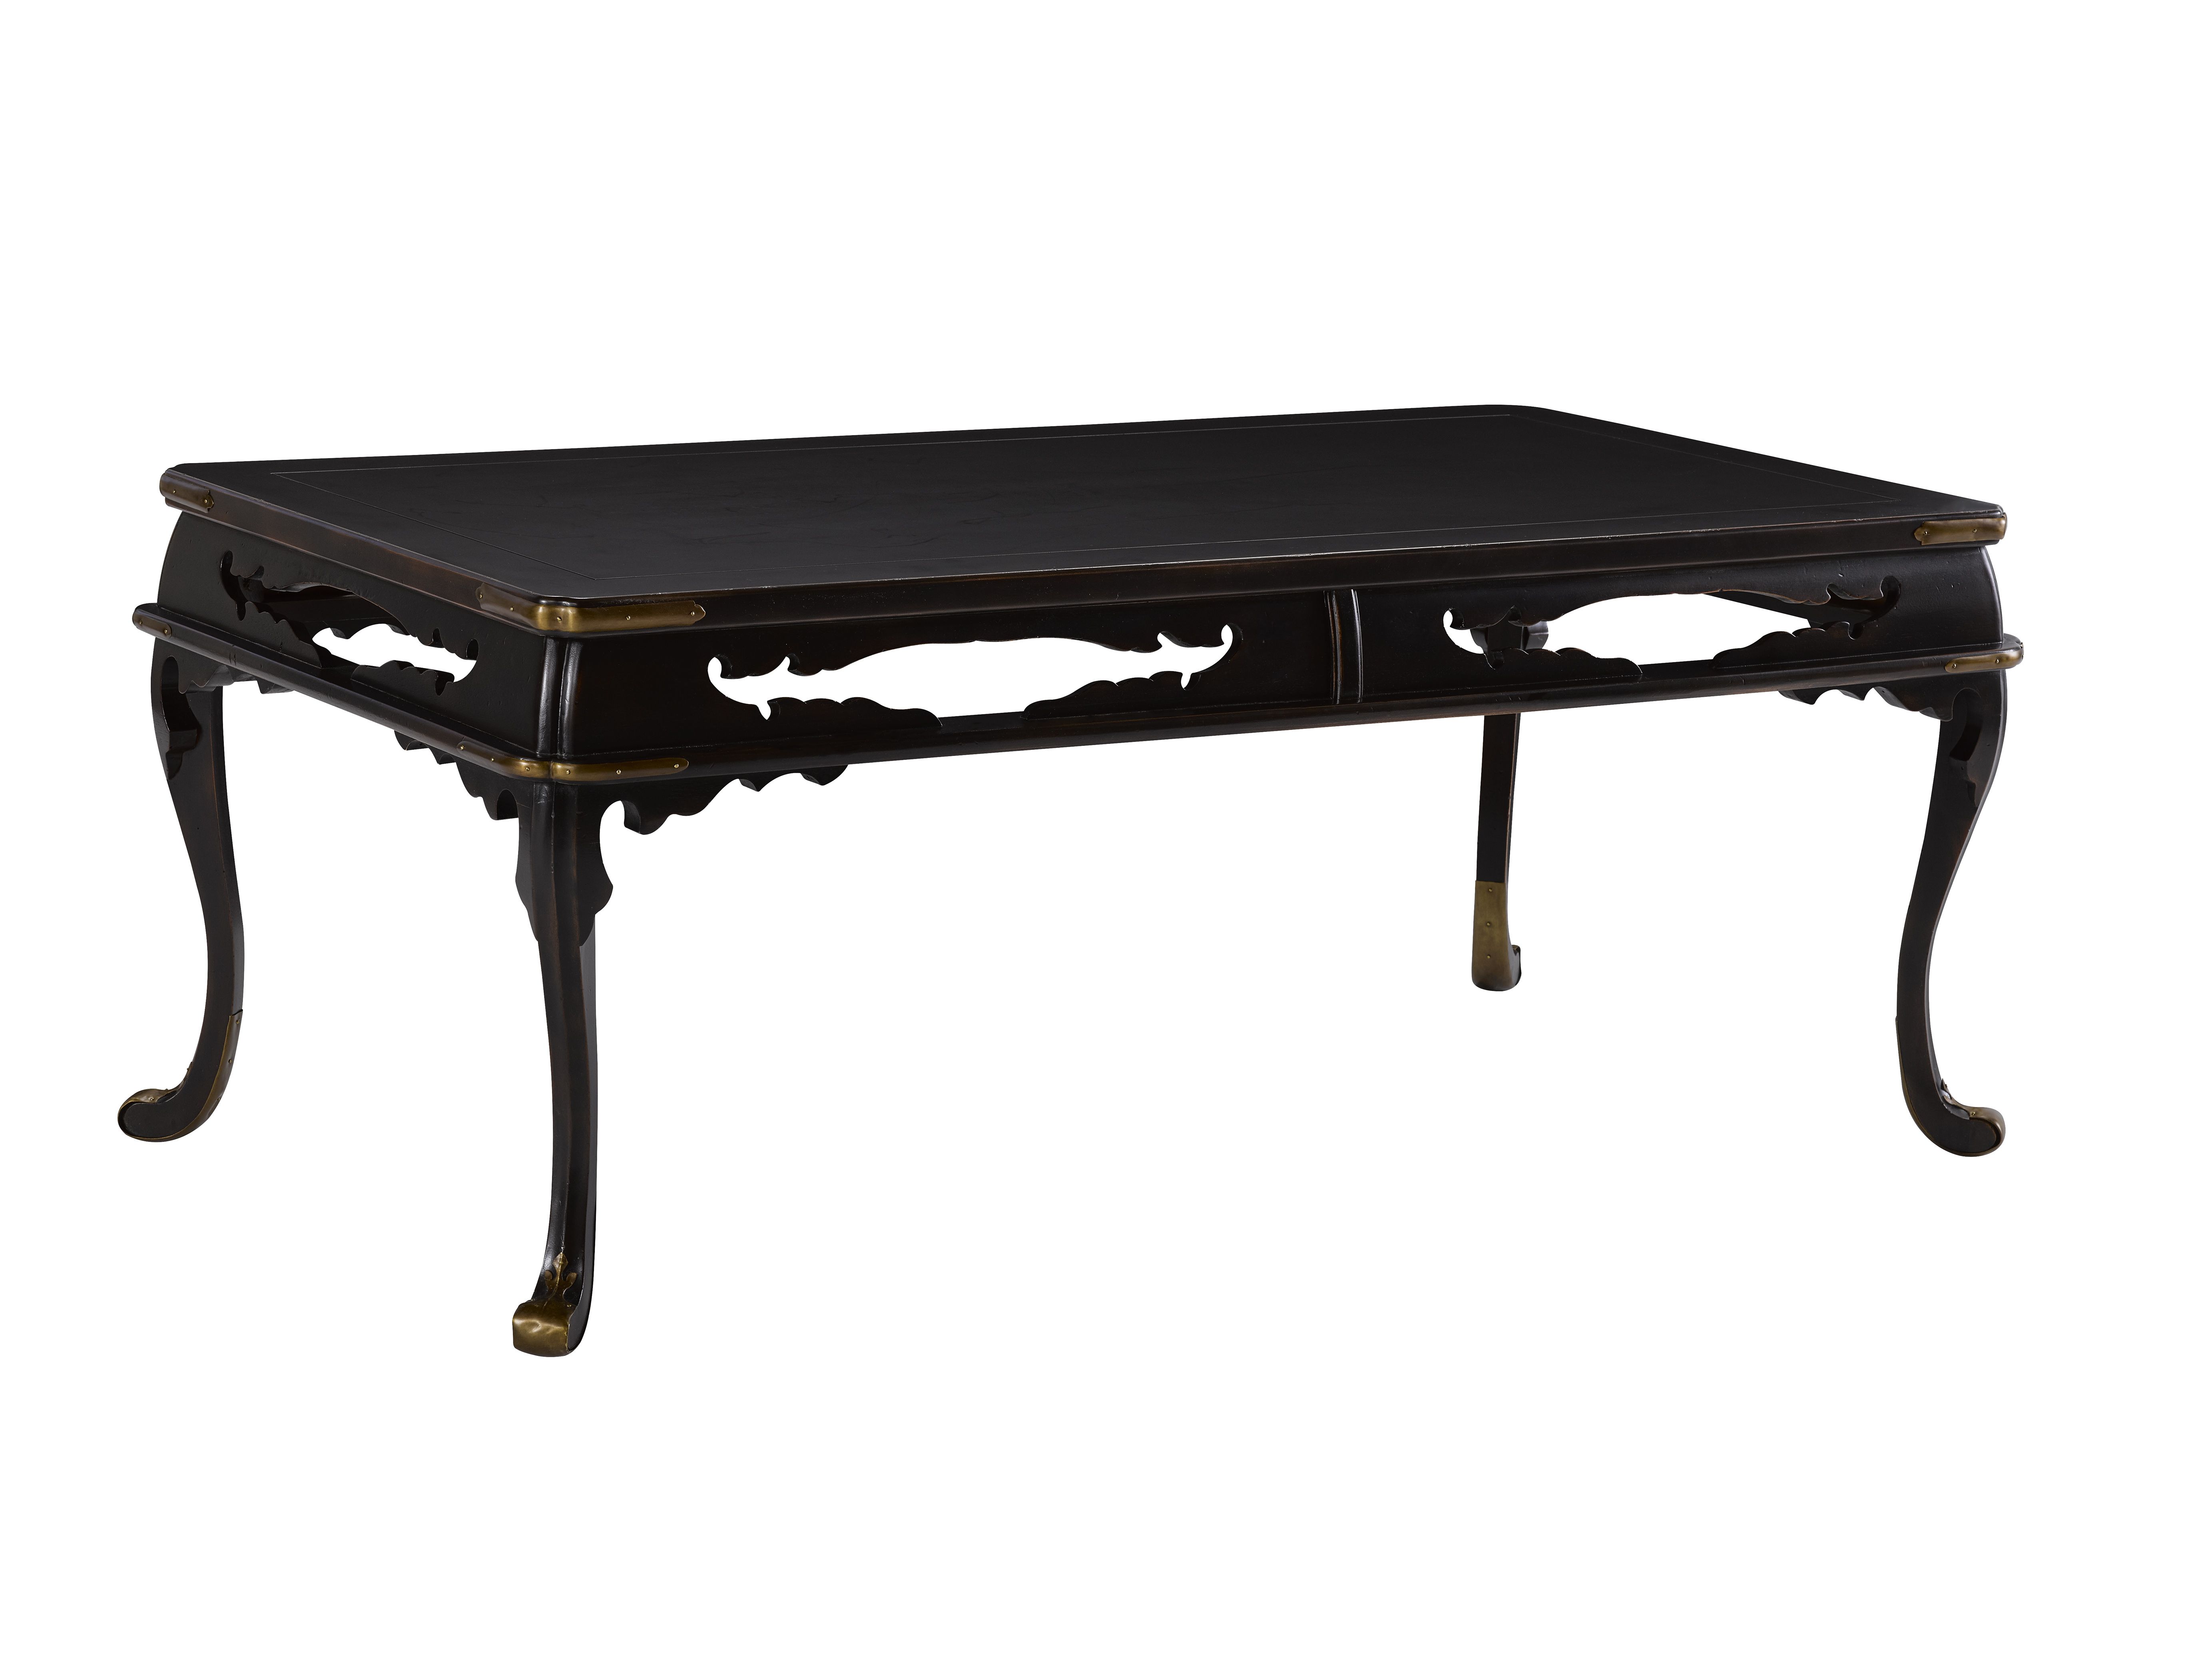 aged black lacquer finished elsie cocktail table with antique brass accent accents item round mirrored counter height island grohe rainshower large patio cover tablecloths and